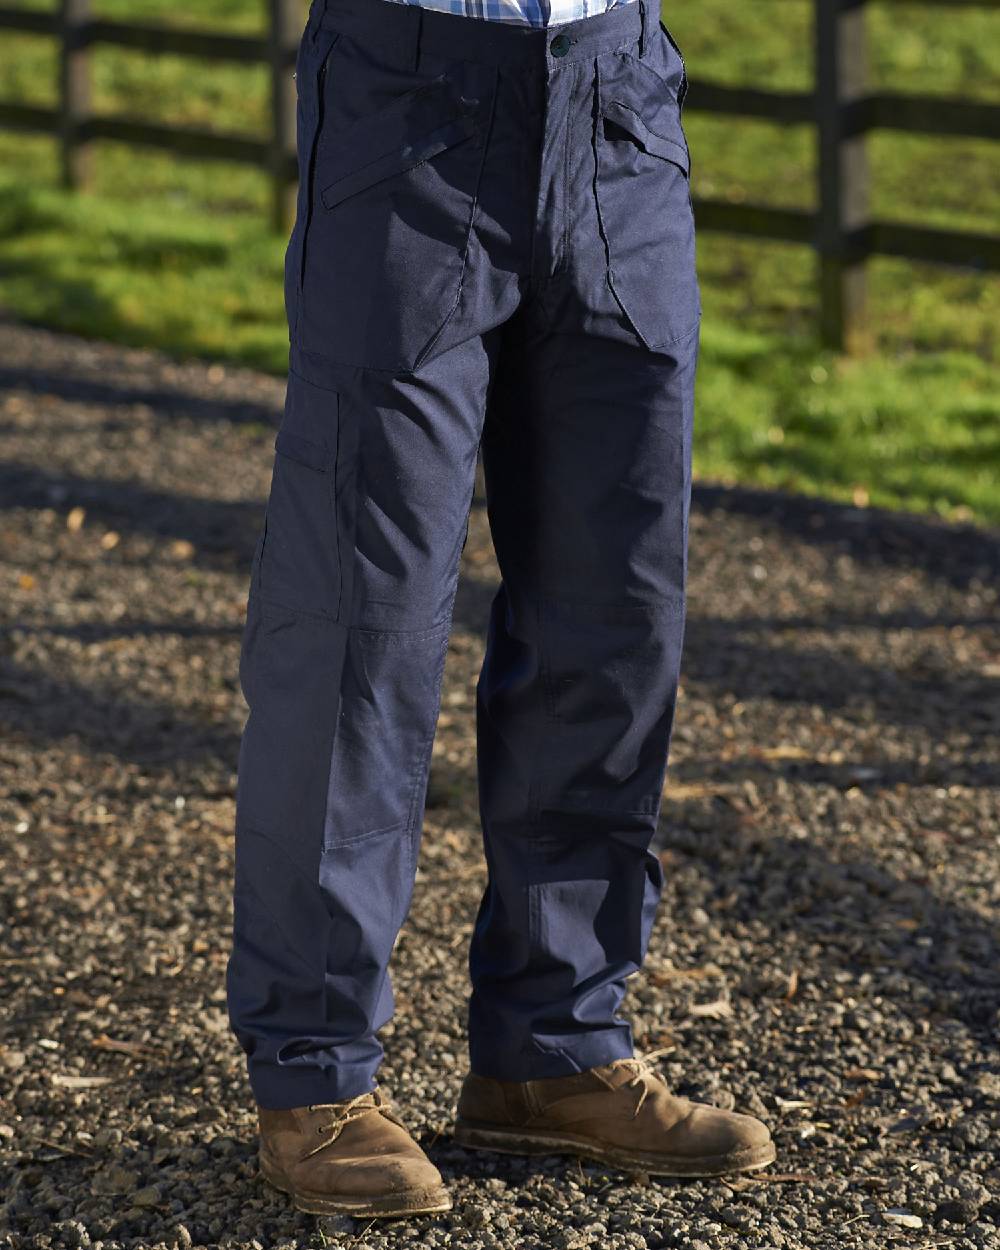 DuluthFlex™ Dry on the Fly® Pants